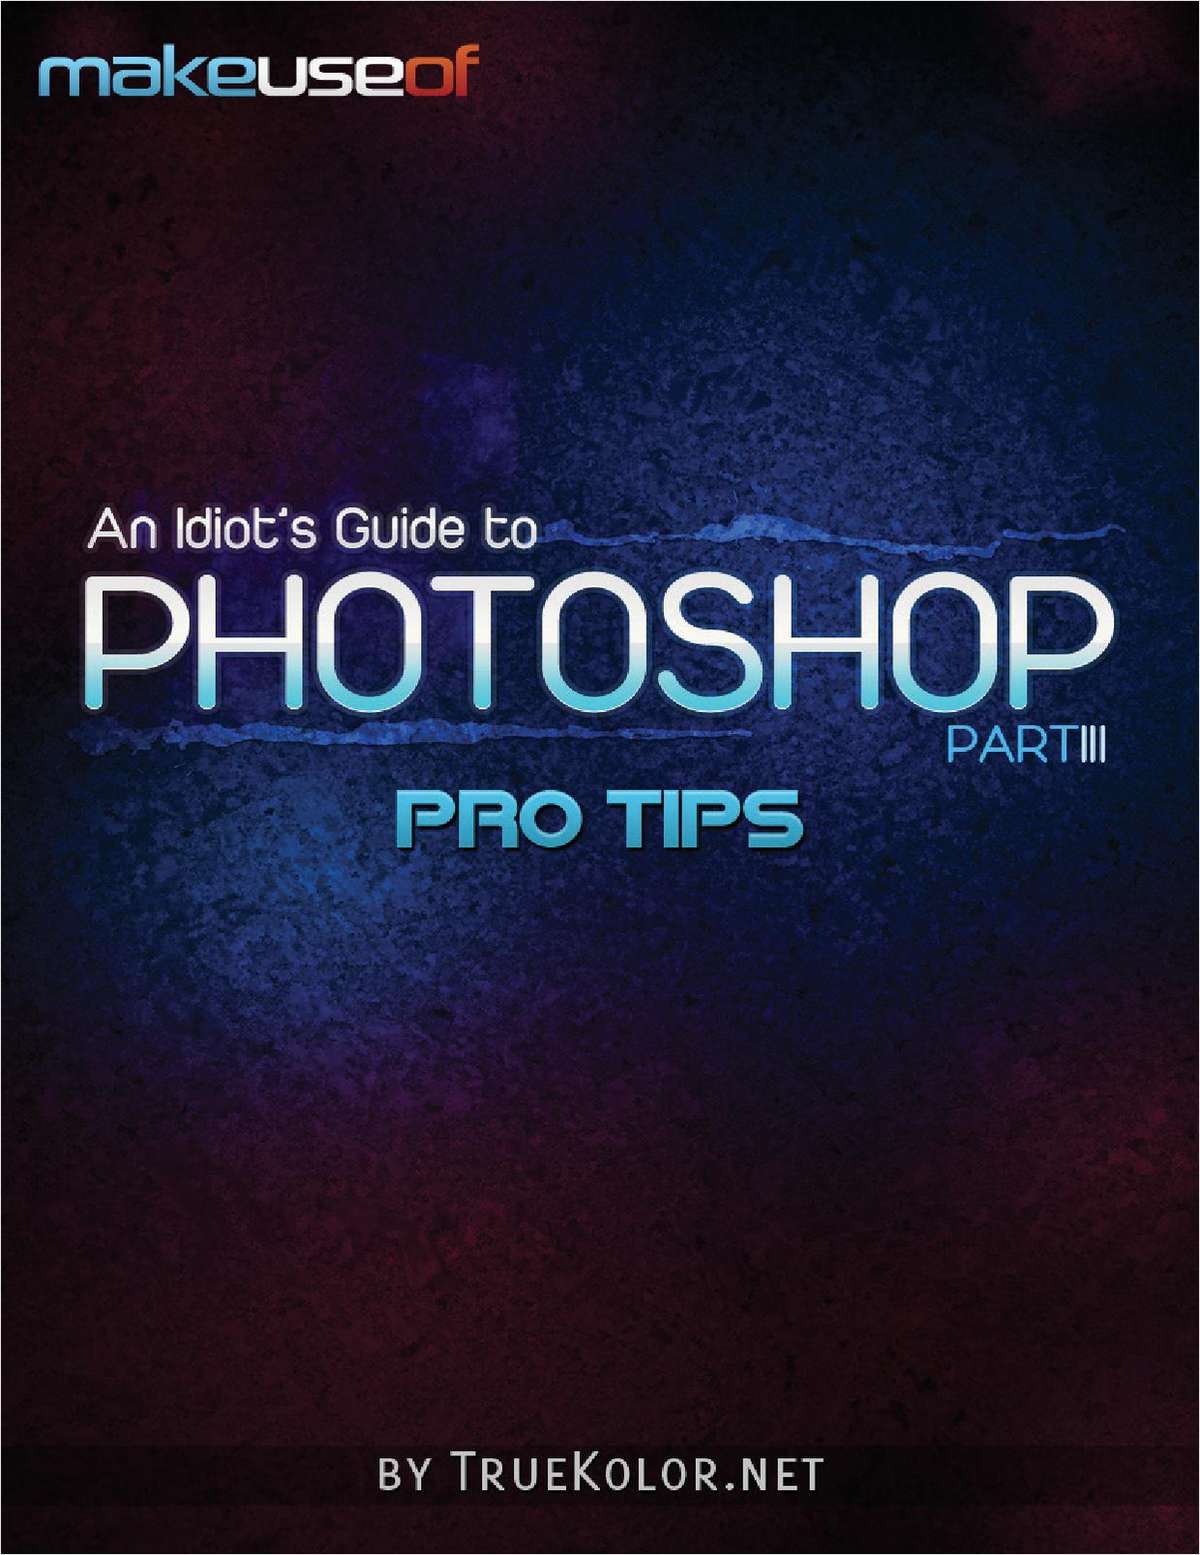 An Idiots Guide to Photoshop: Part 3 - Pro Tips